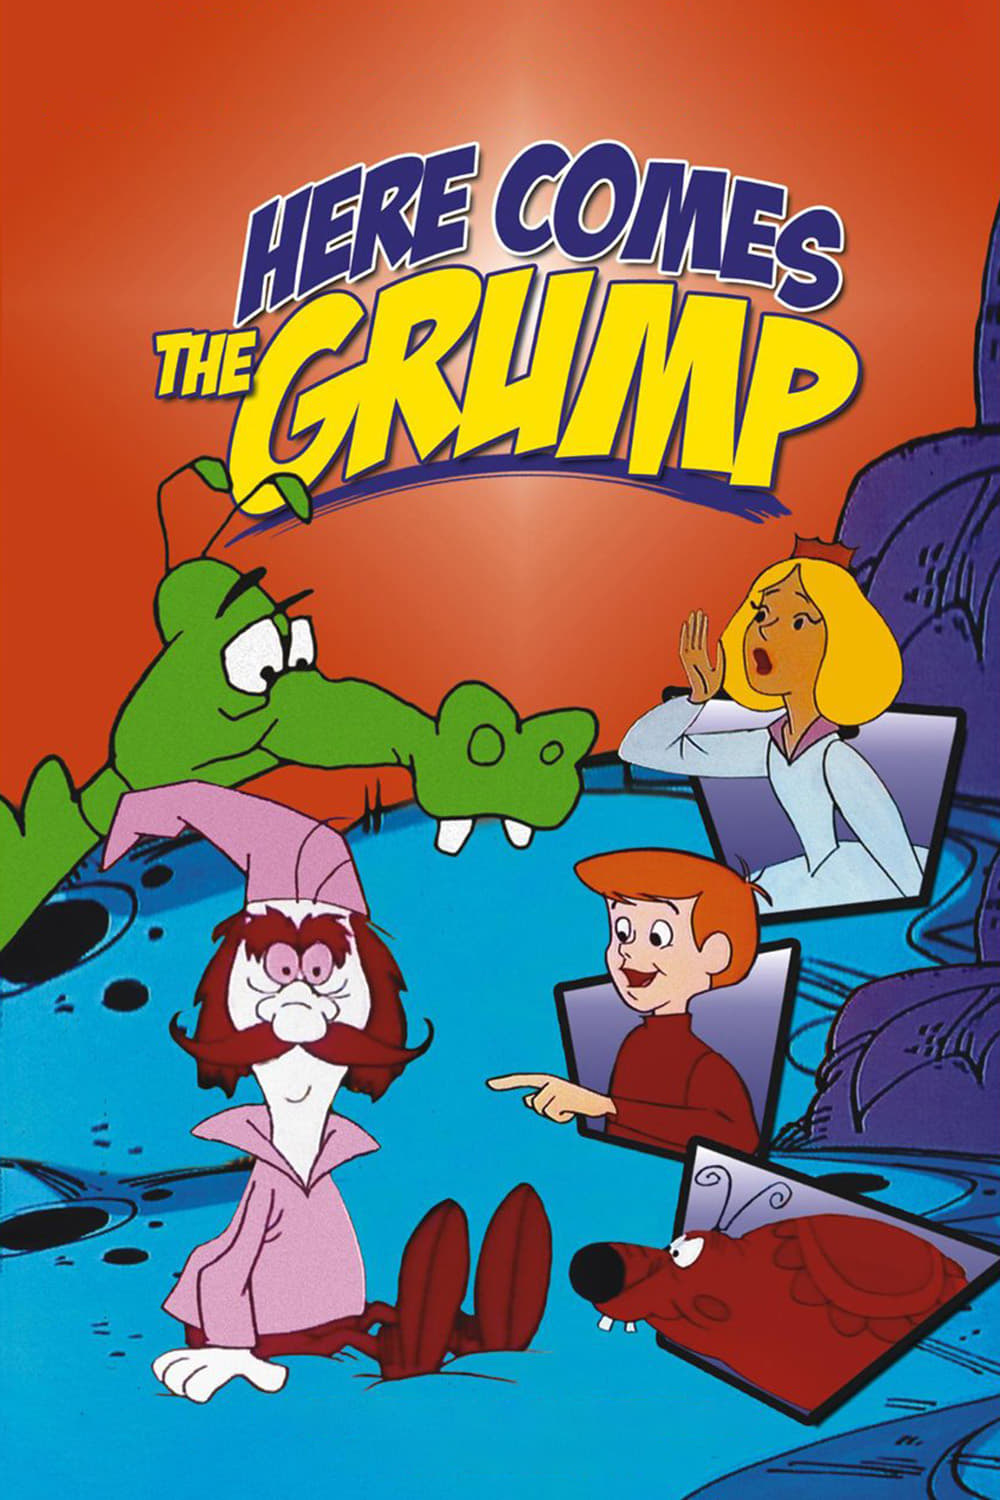 Here Comes the Grump (1969)